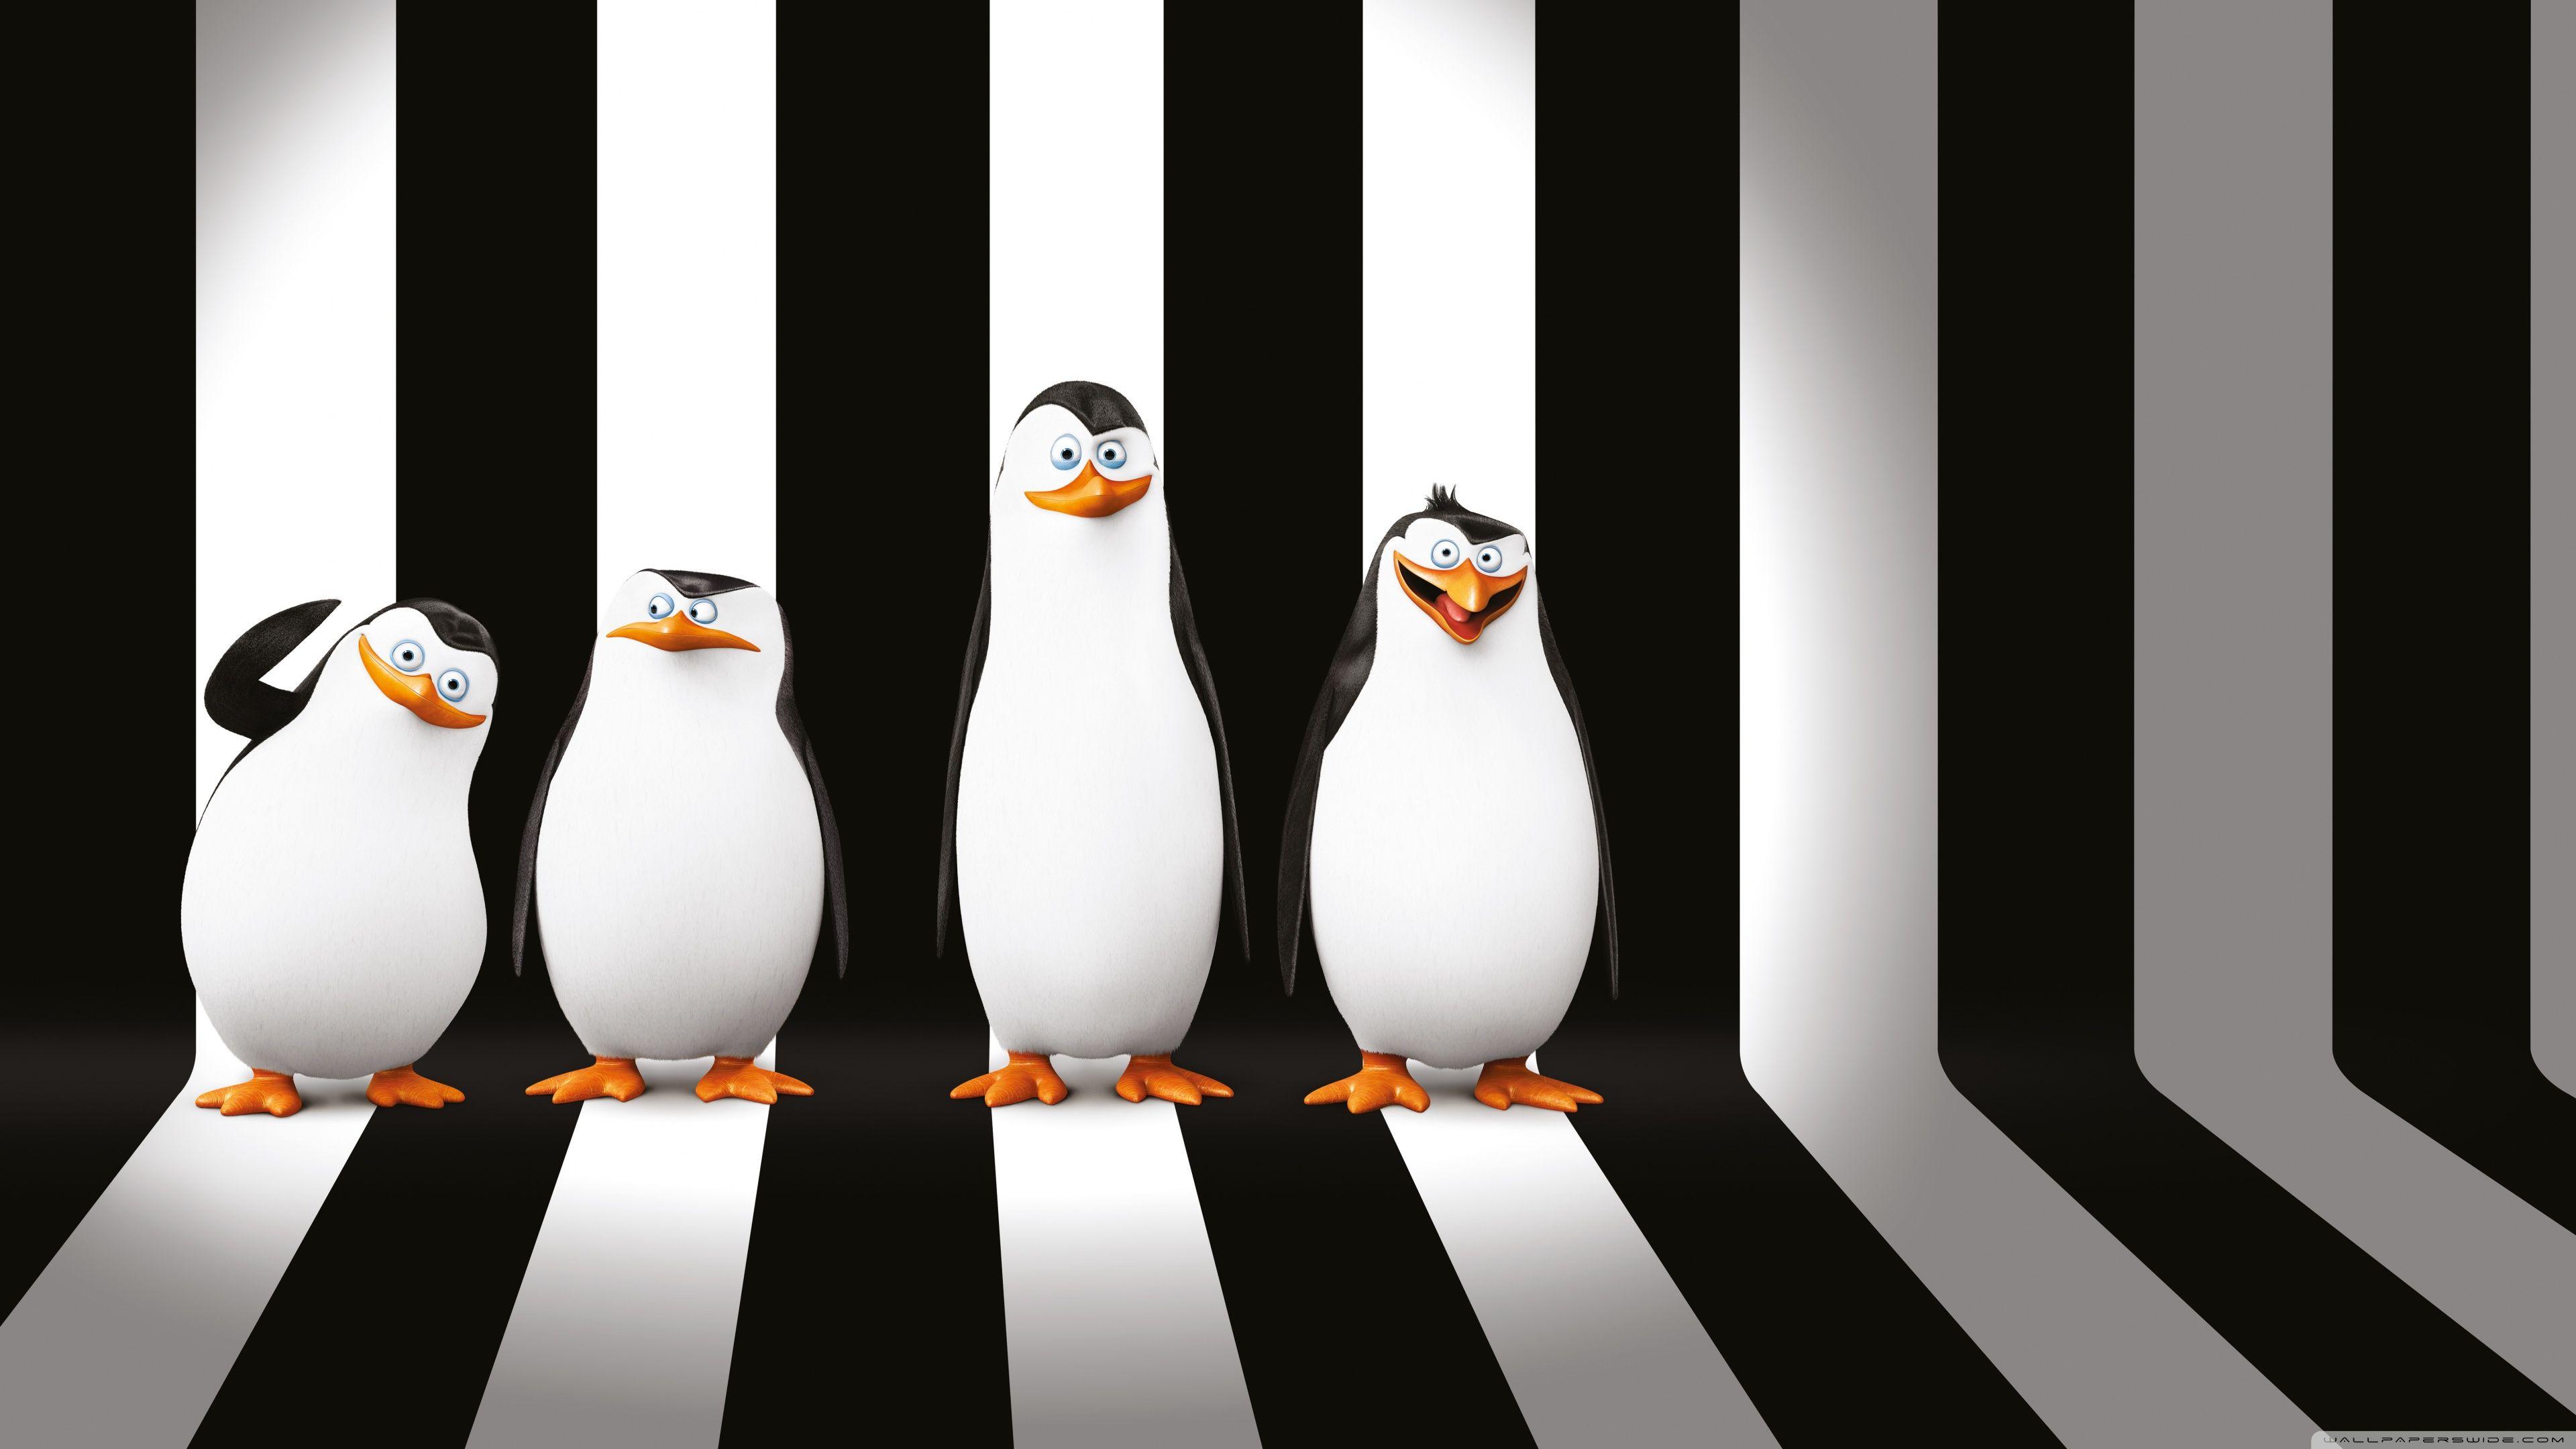 Animated Penguin Wallpapers - Wallpaper Cave